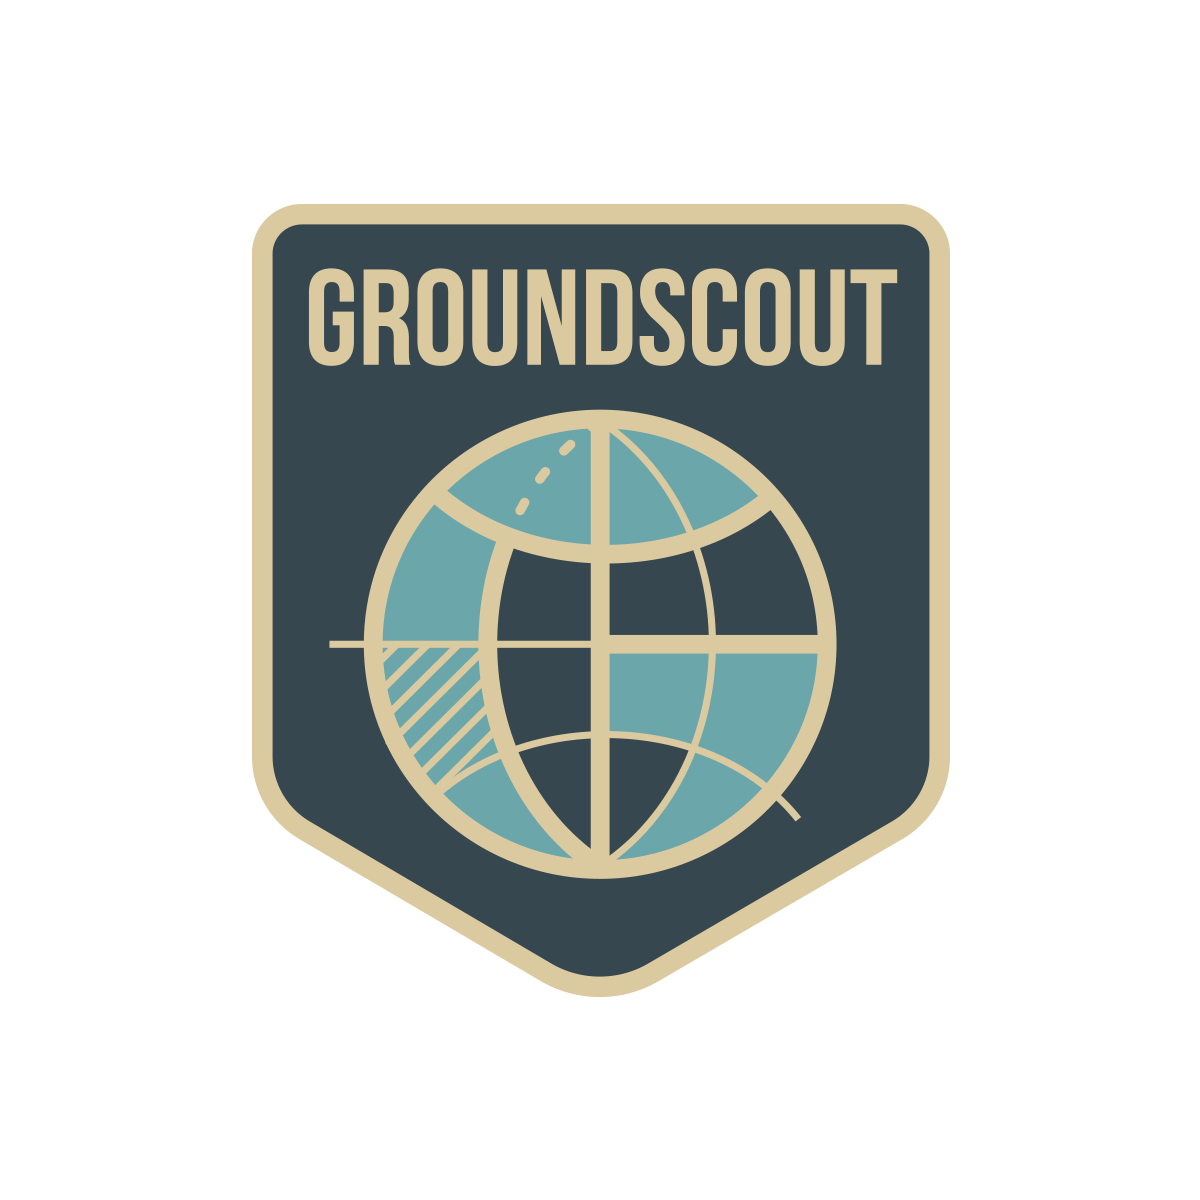 Groundscout